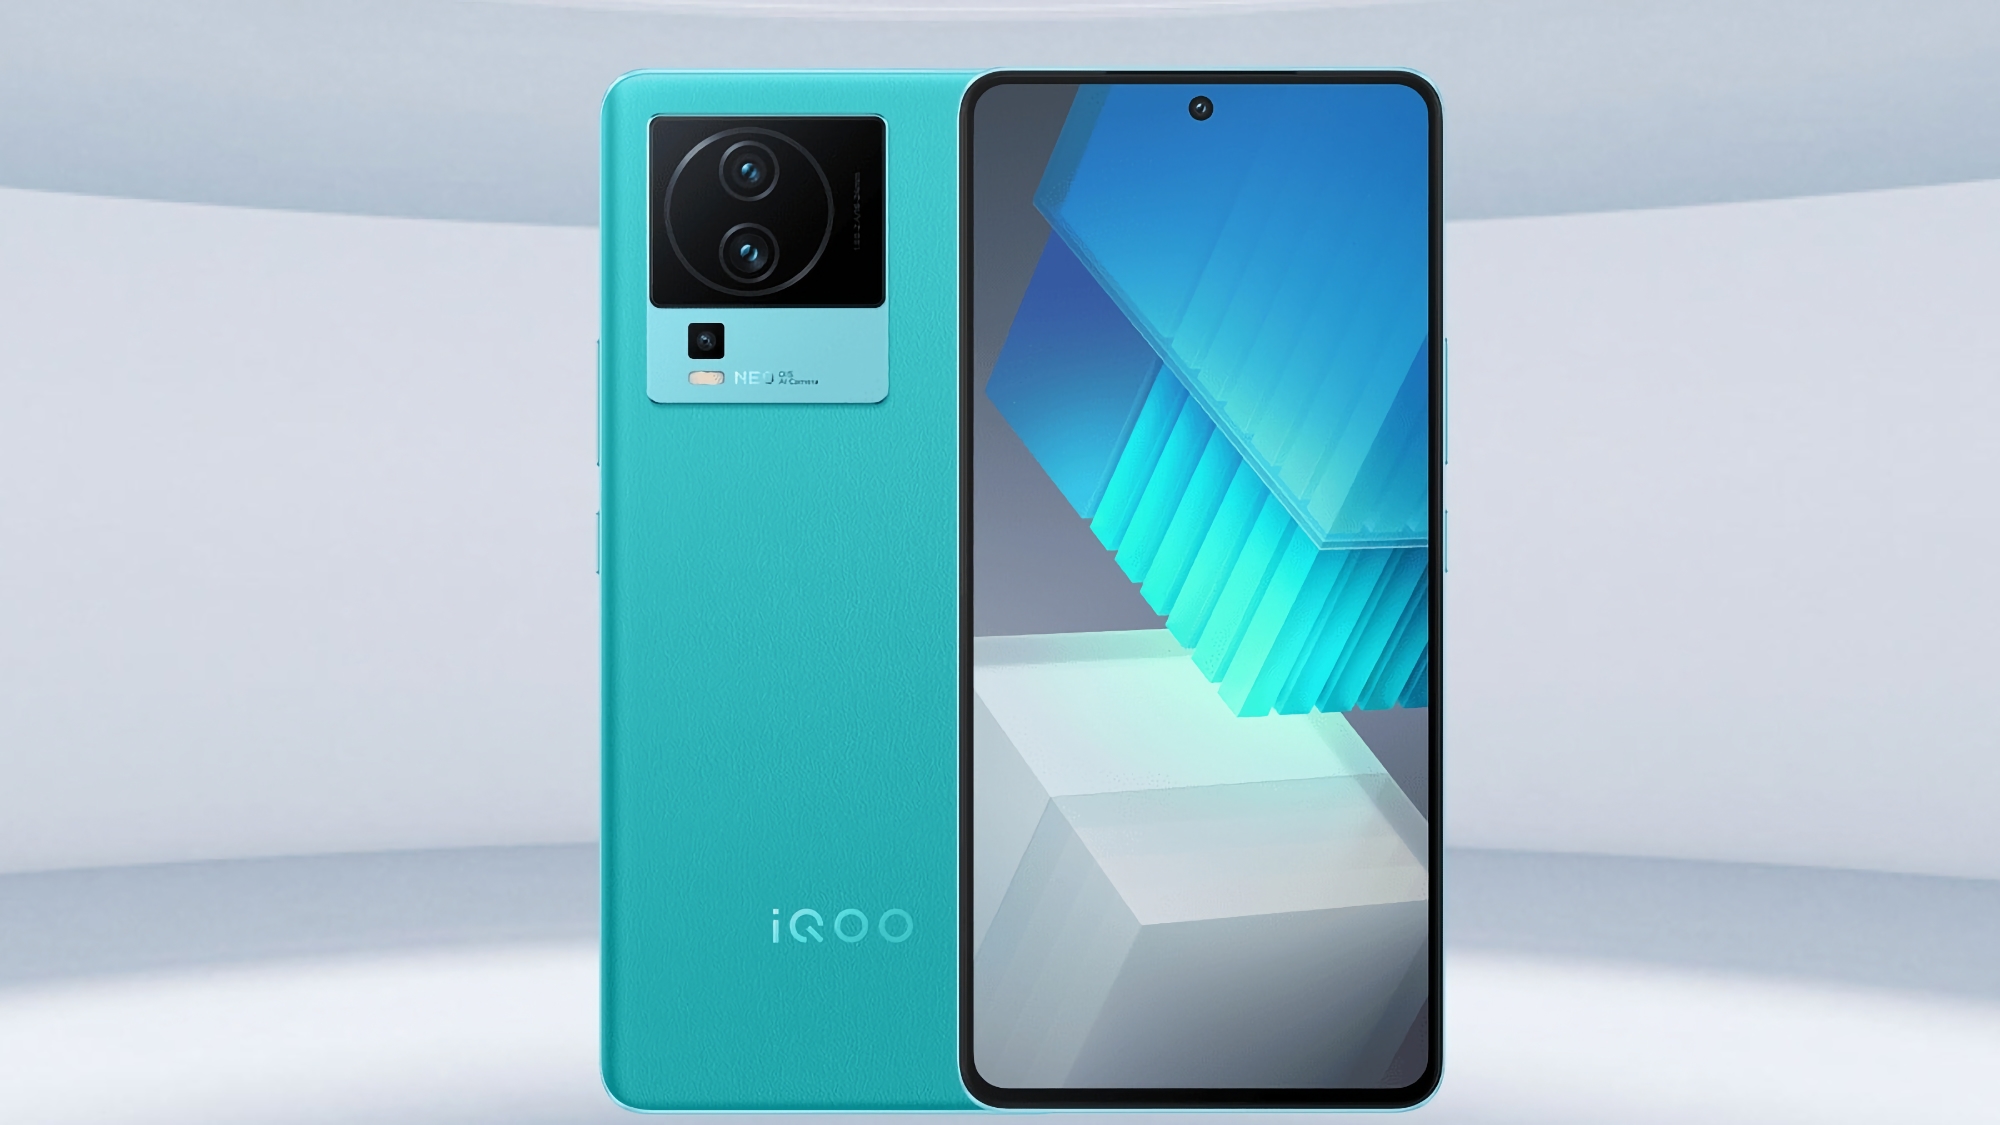 It's official: iQOO Neo 7 5G with 120Hz AMOLED screen, MediaTek Dimensity 8200 chip and 120W charging will be unveiled on February 16